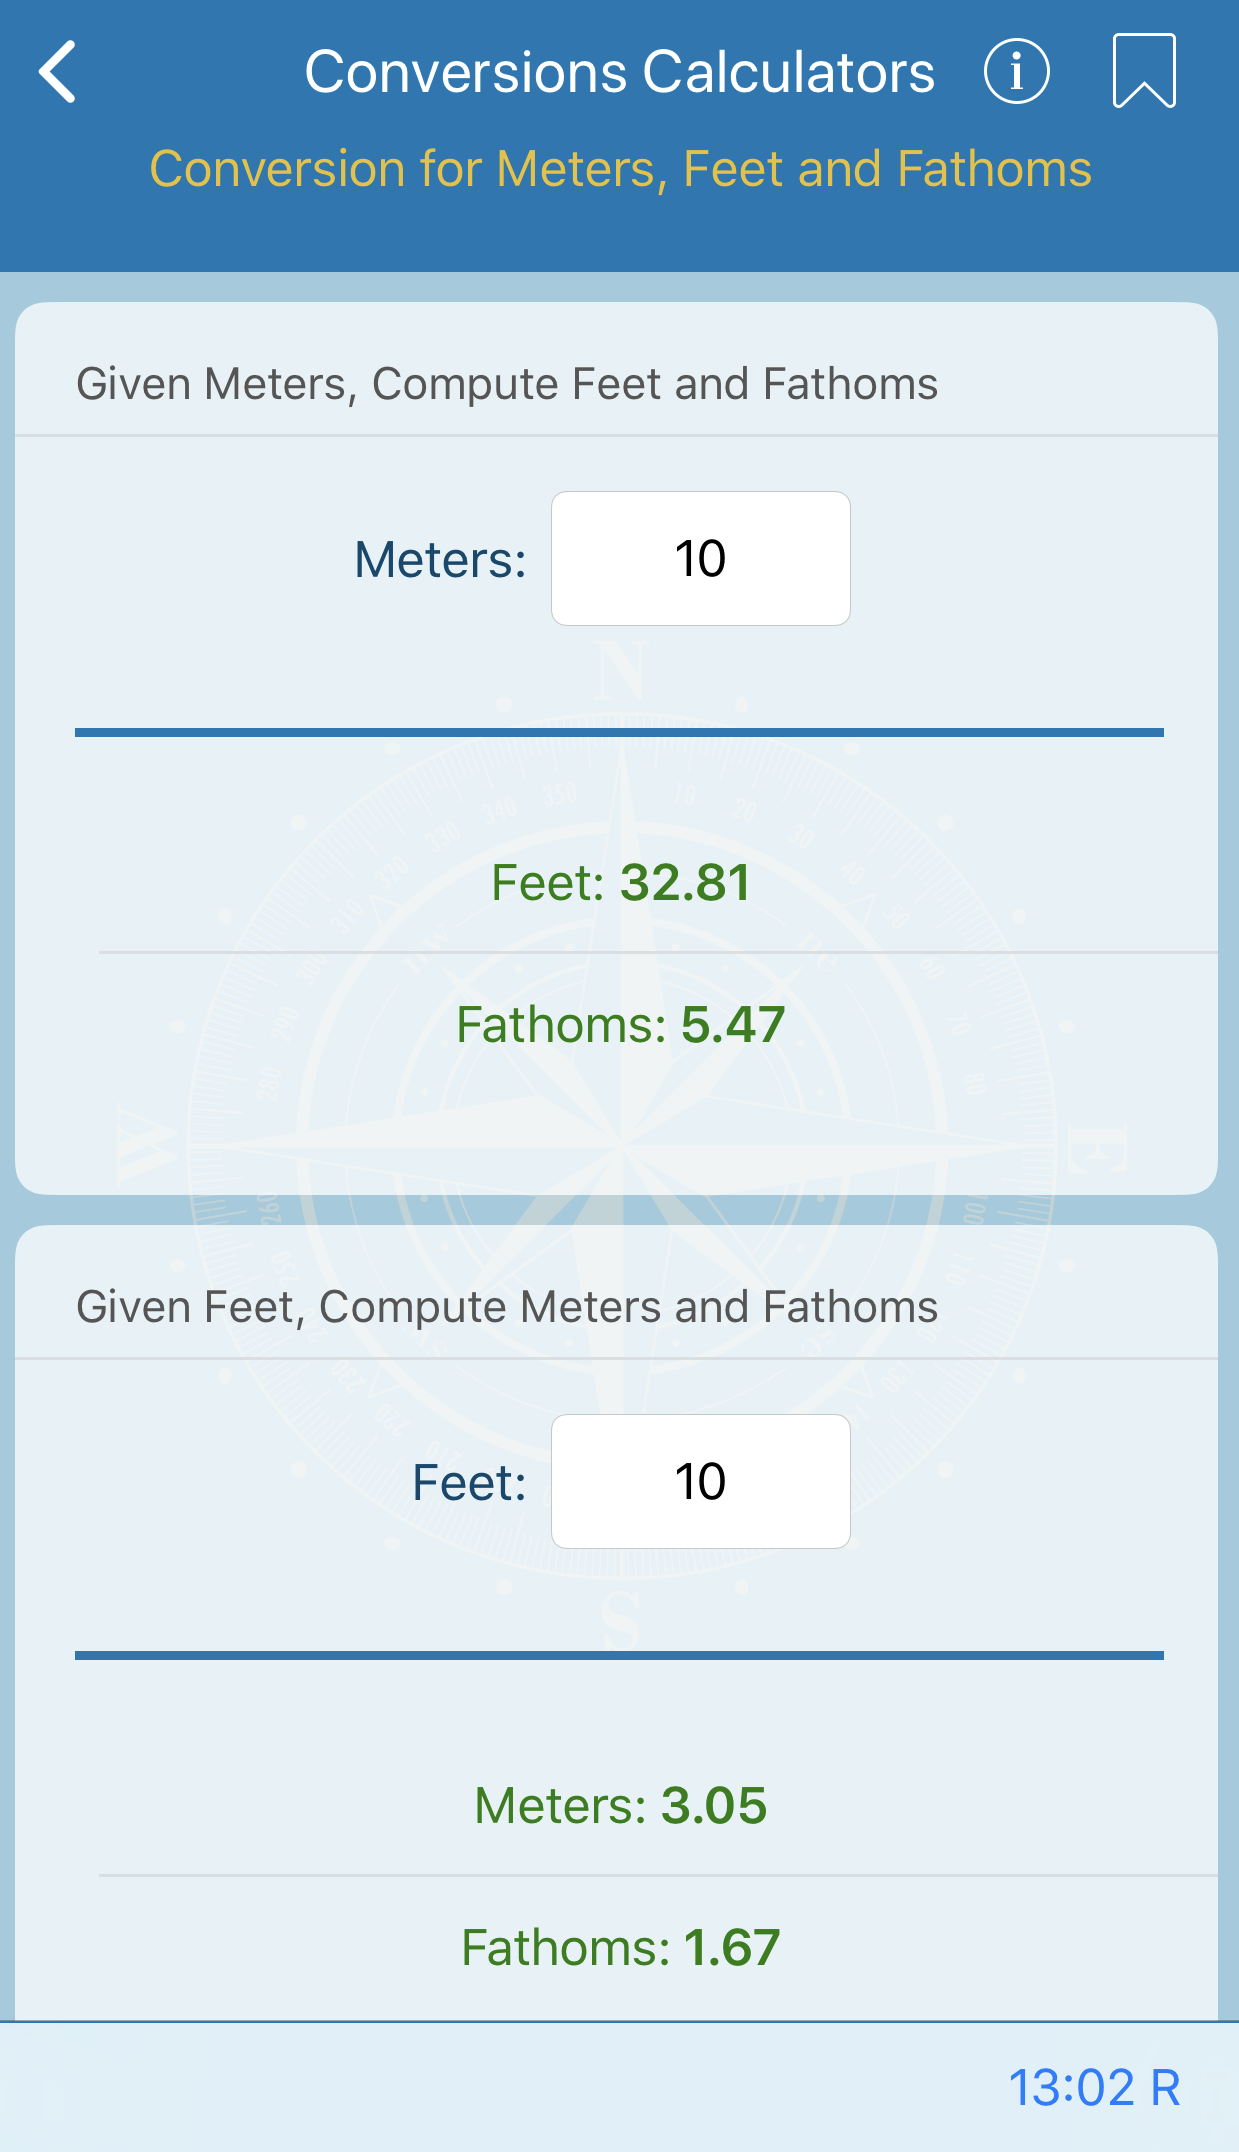 Conversion for Meters, Feet and Fathoms